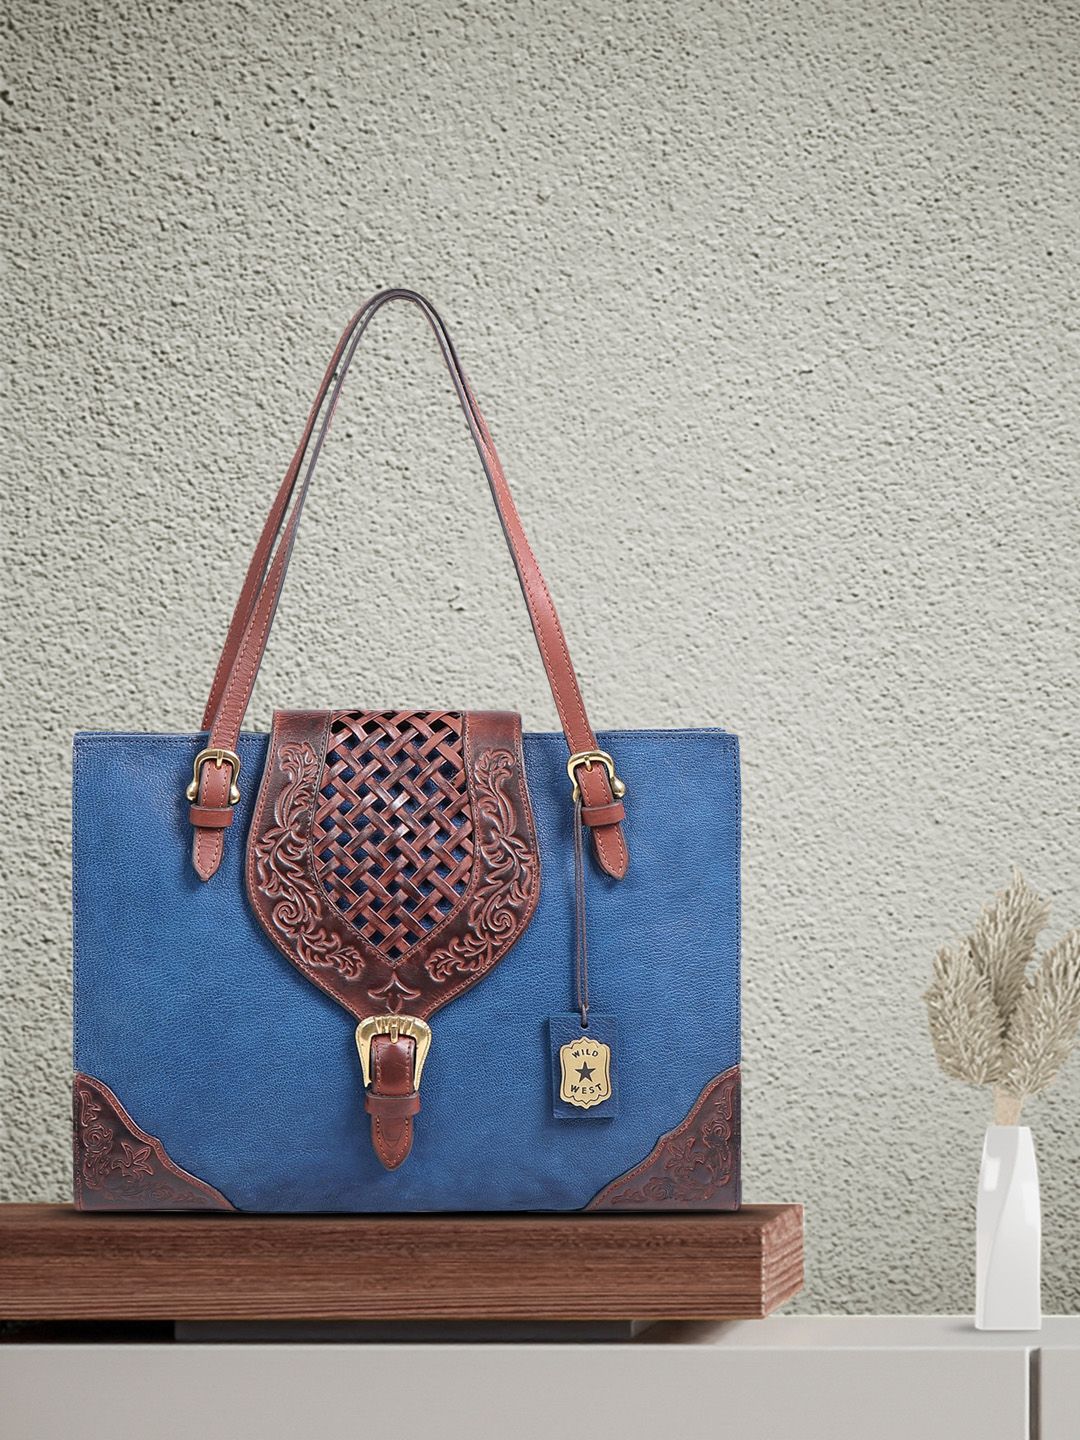 Hidesign Blue Leather Structured Handheld Bag Price in India